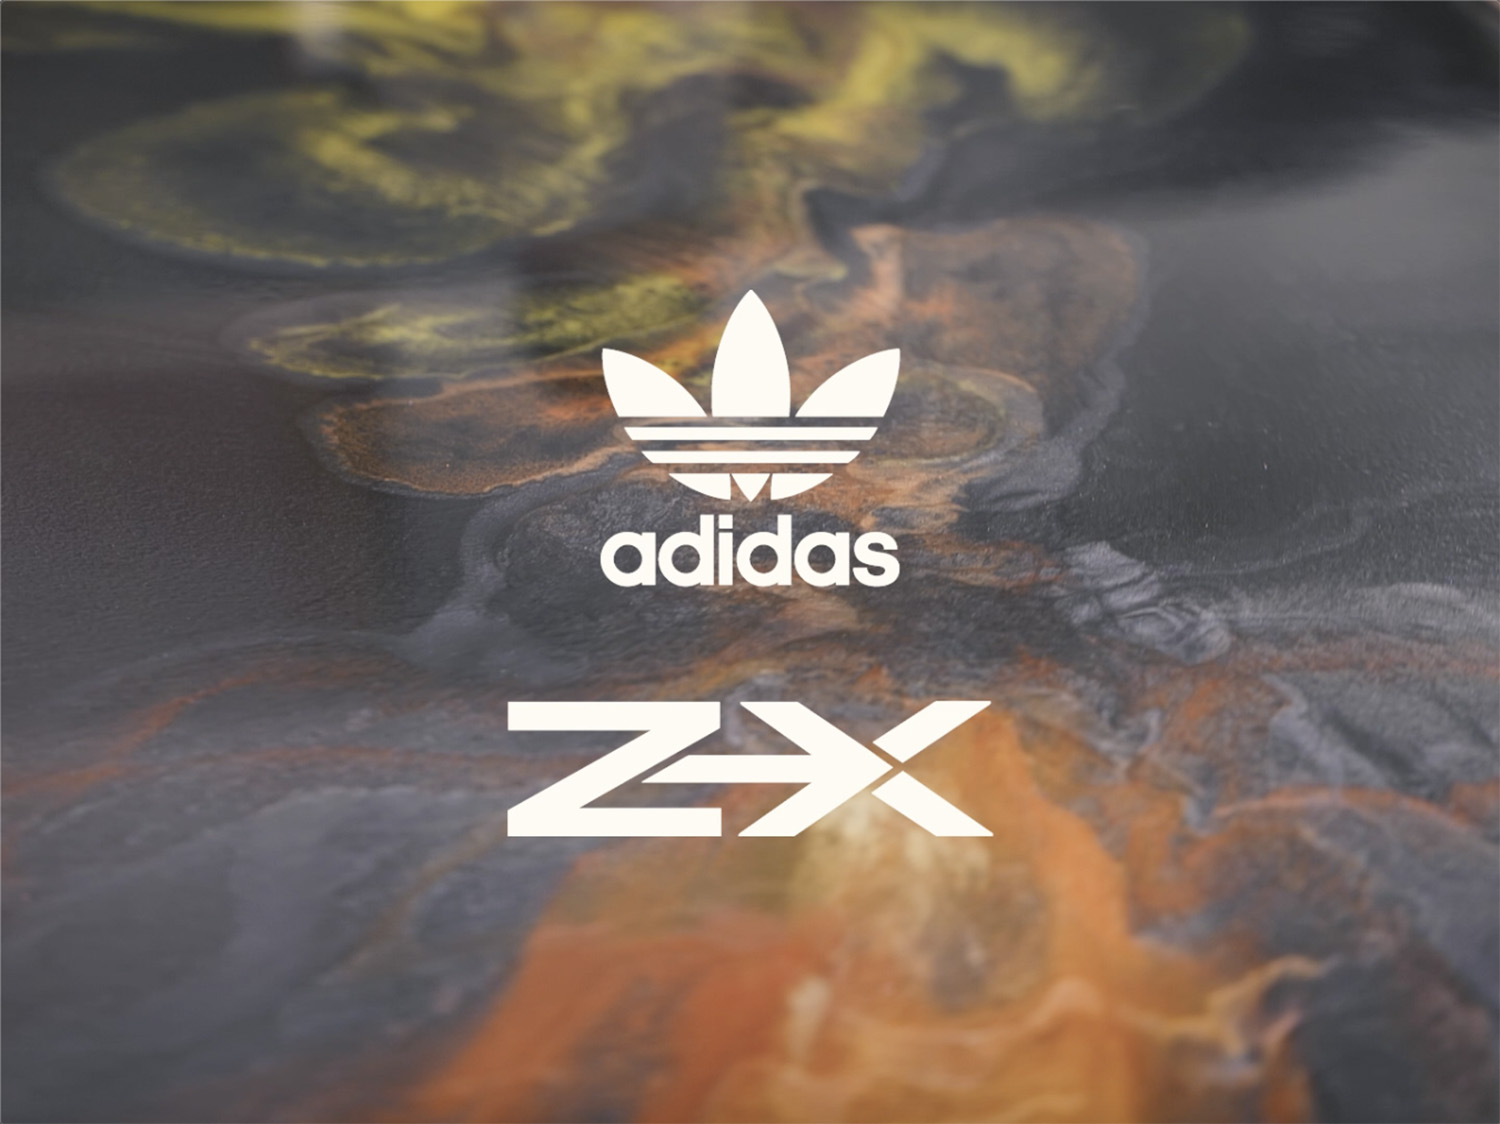 Cool 3D Adidas Wallpapers Wallpapers